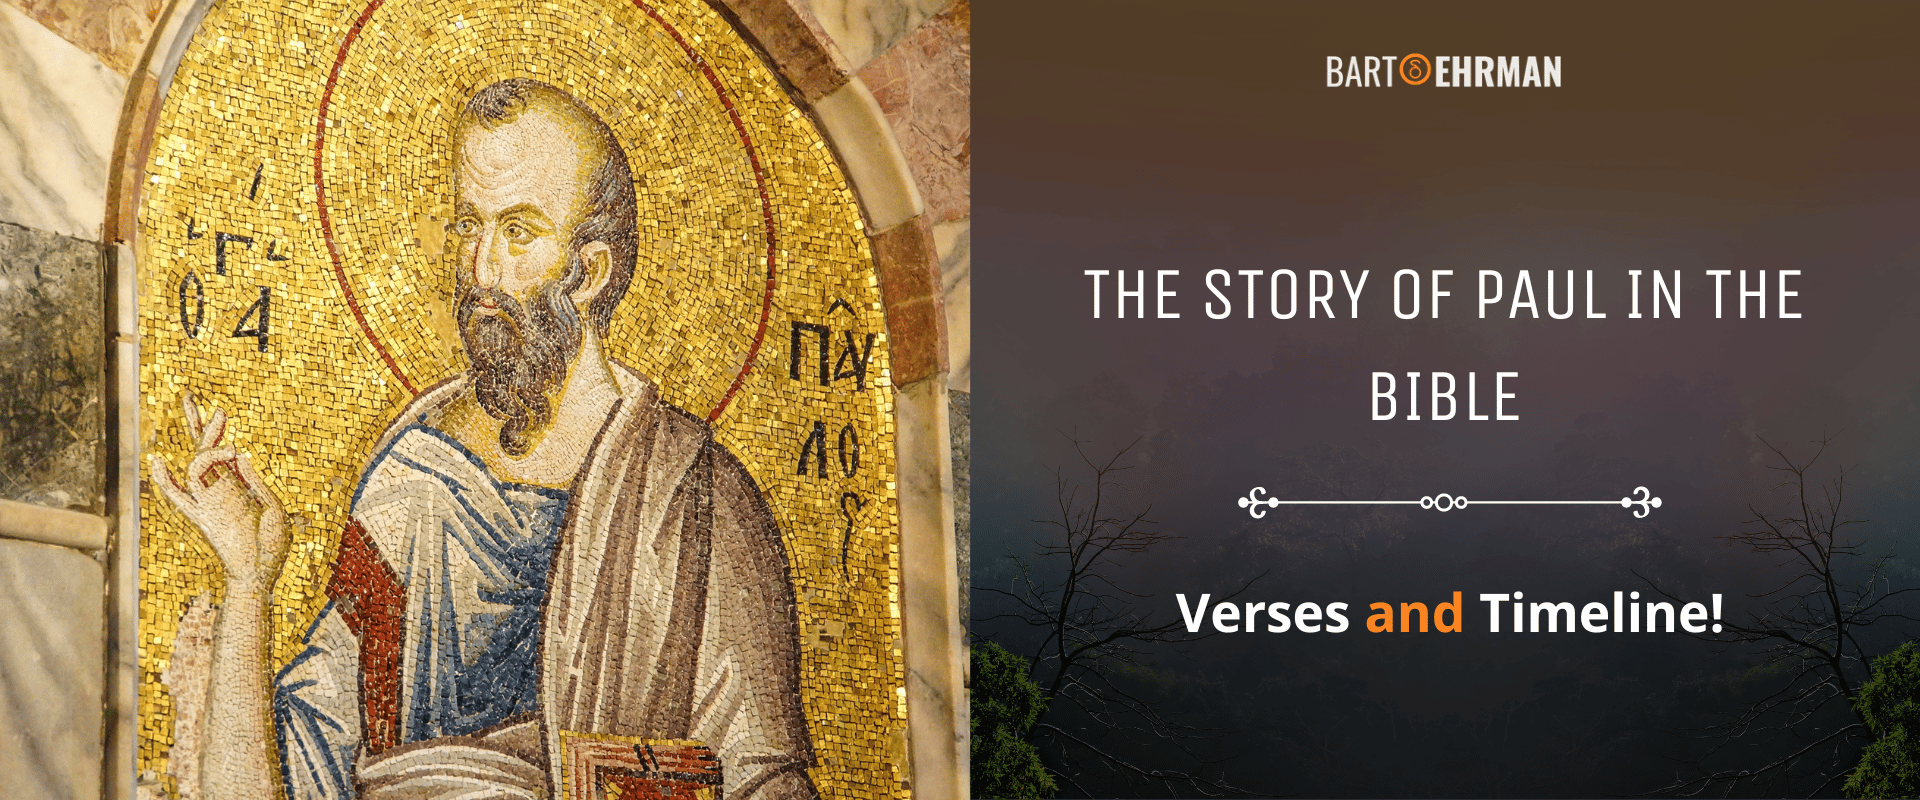 The Story of Paul in the Bible (Verses & Timeline!)